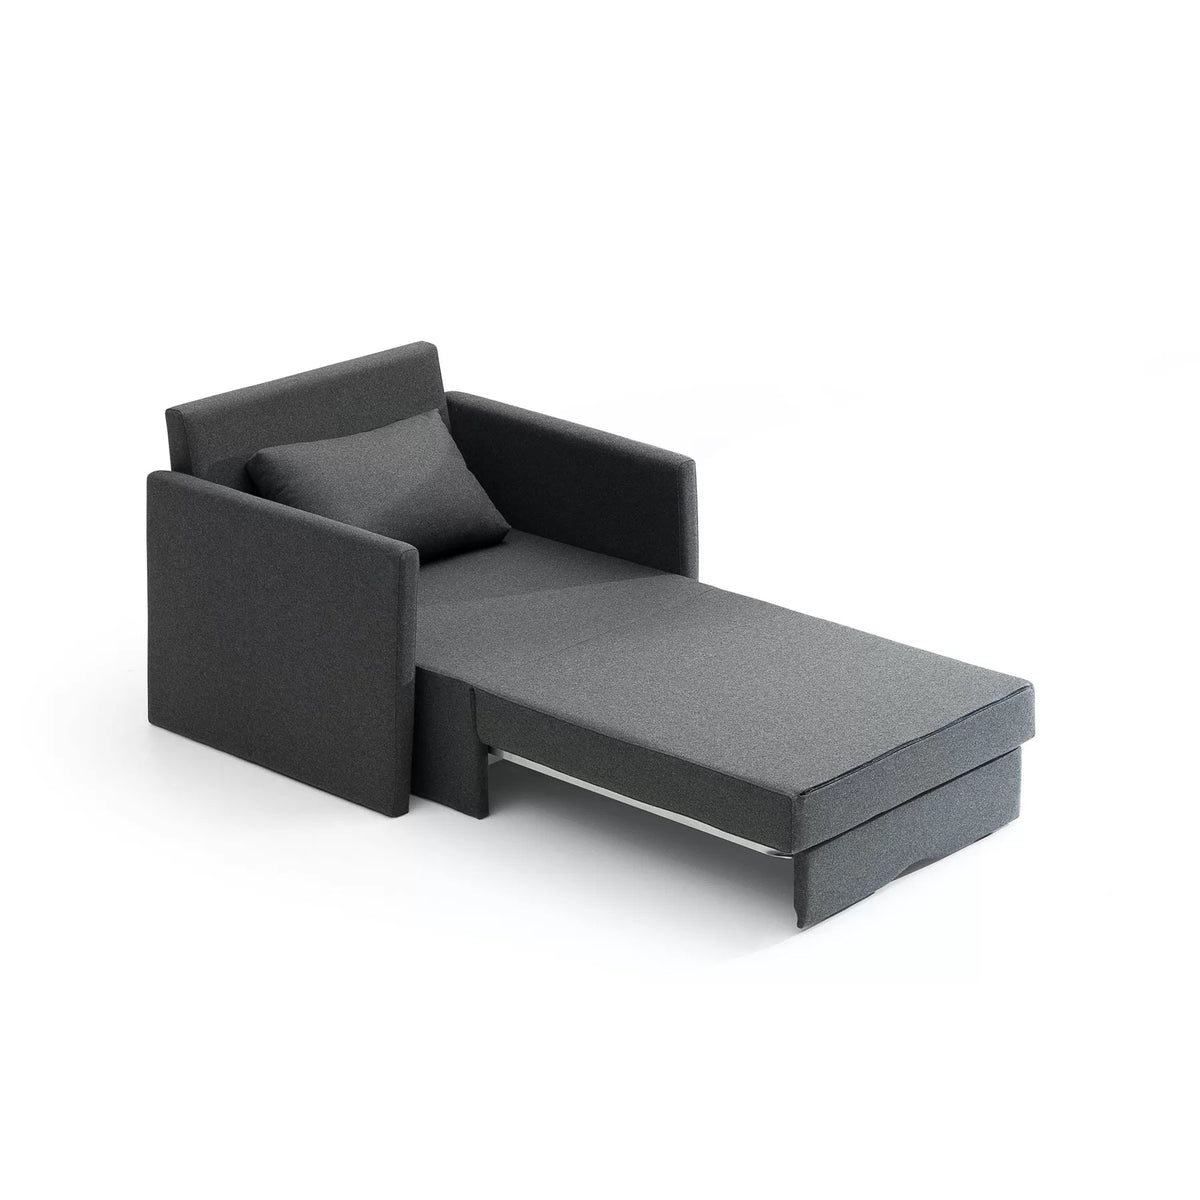 Meno 933-B Lounge Sofa Bed-TM Leader-Contract Furniture Store